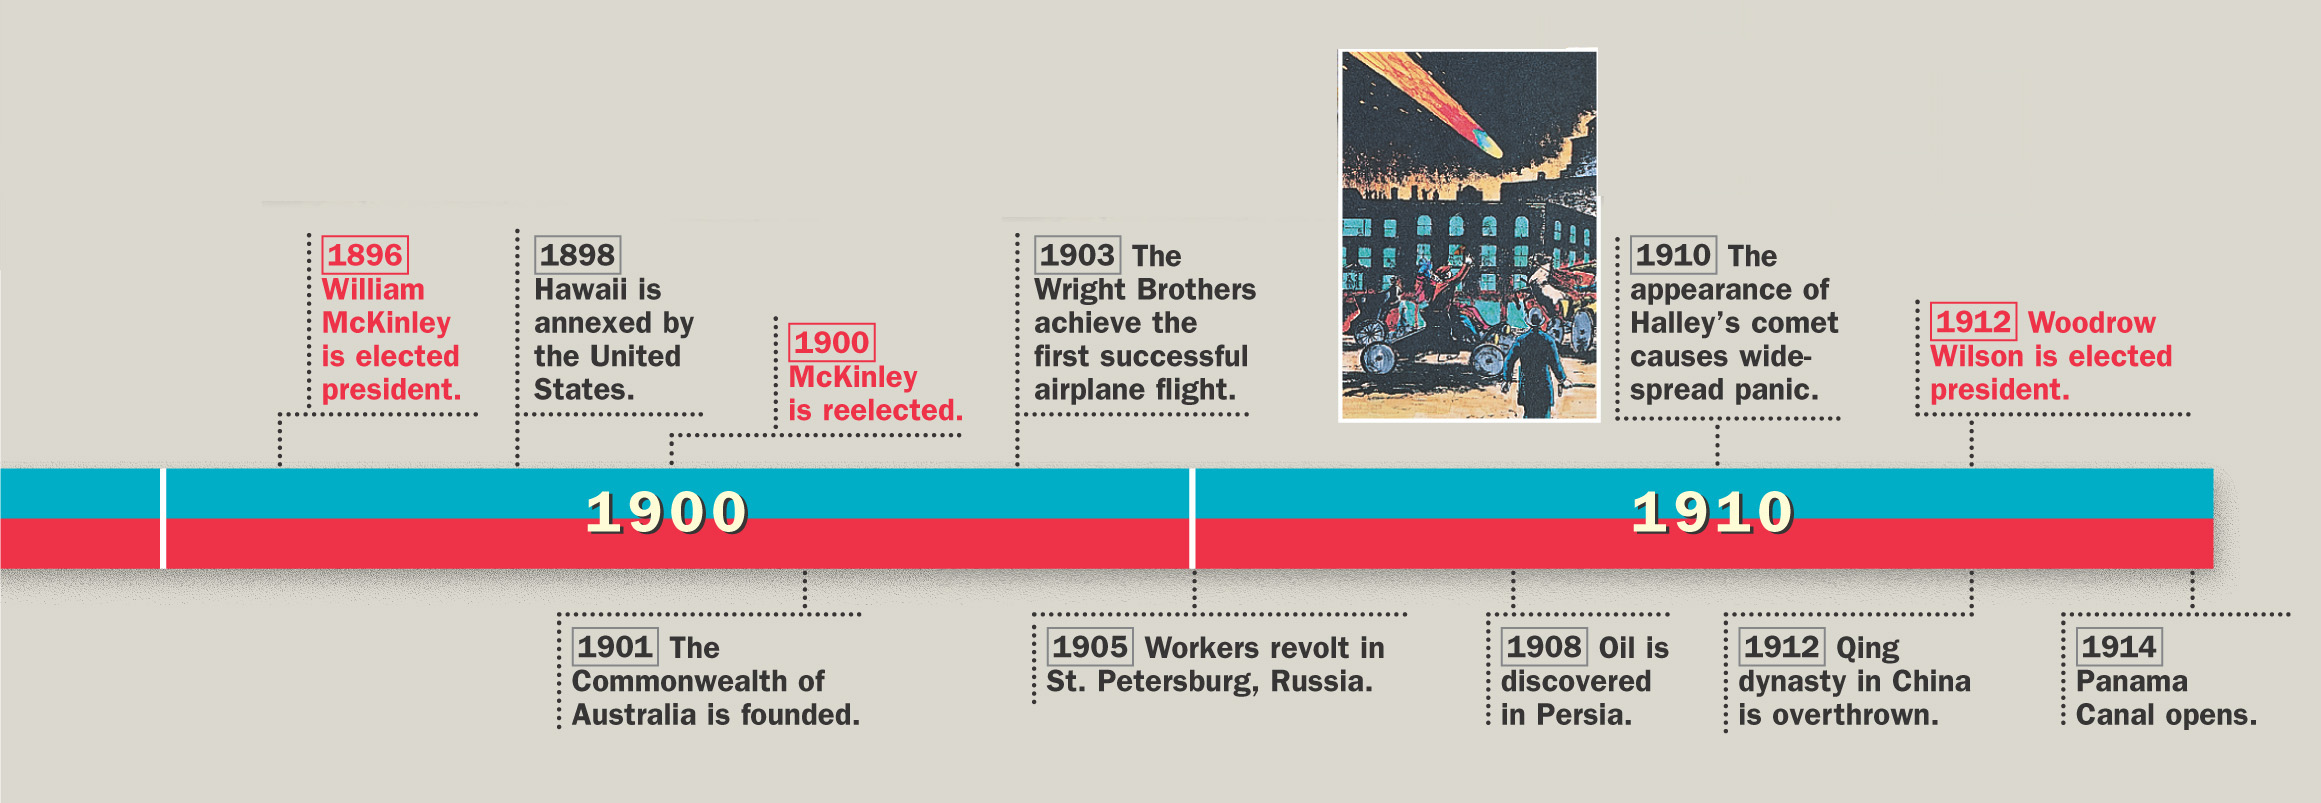 A timeline of historical events from 1876 to 1914 in both the U.S. and the world